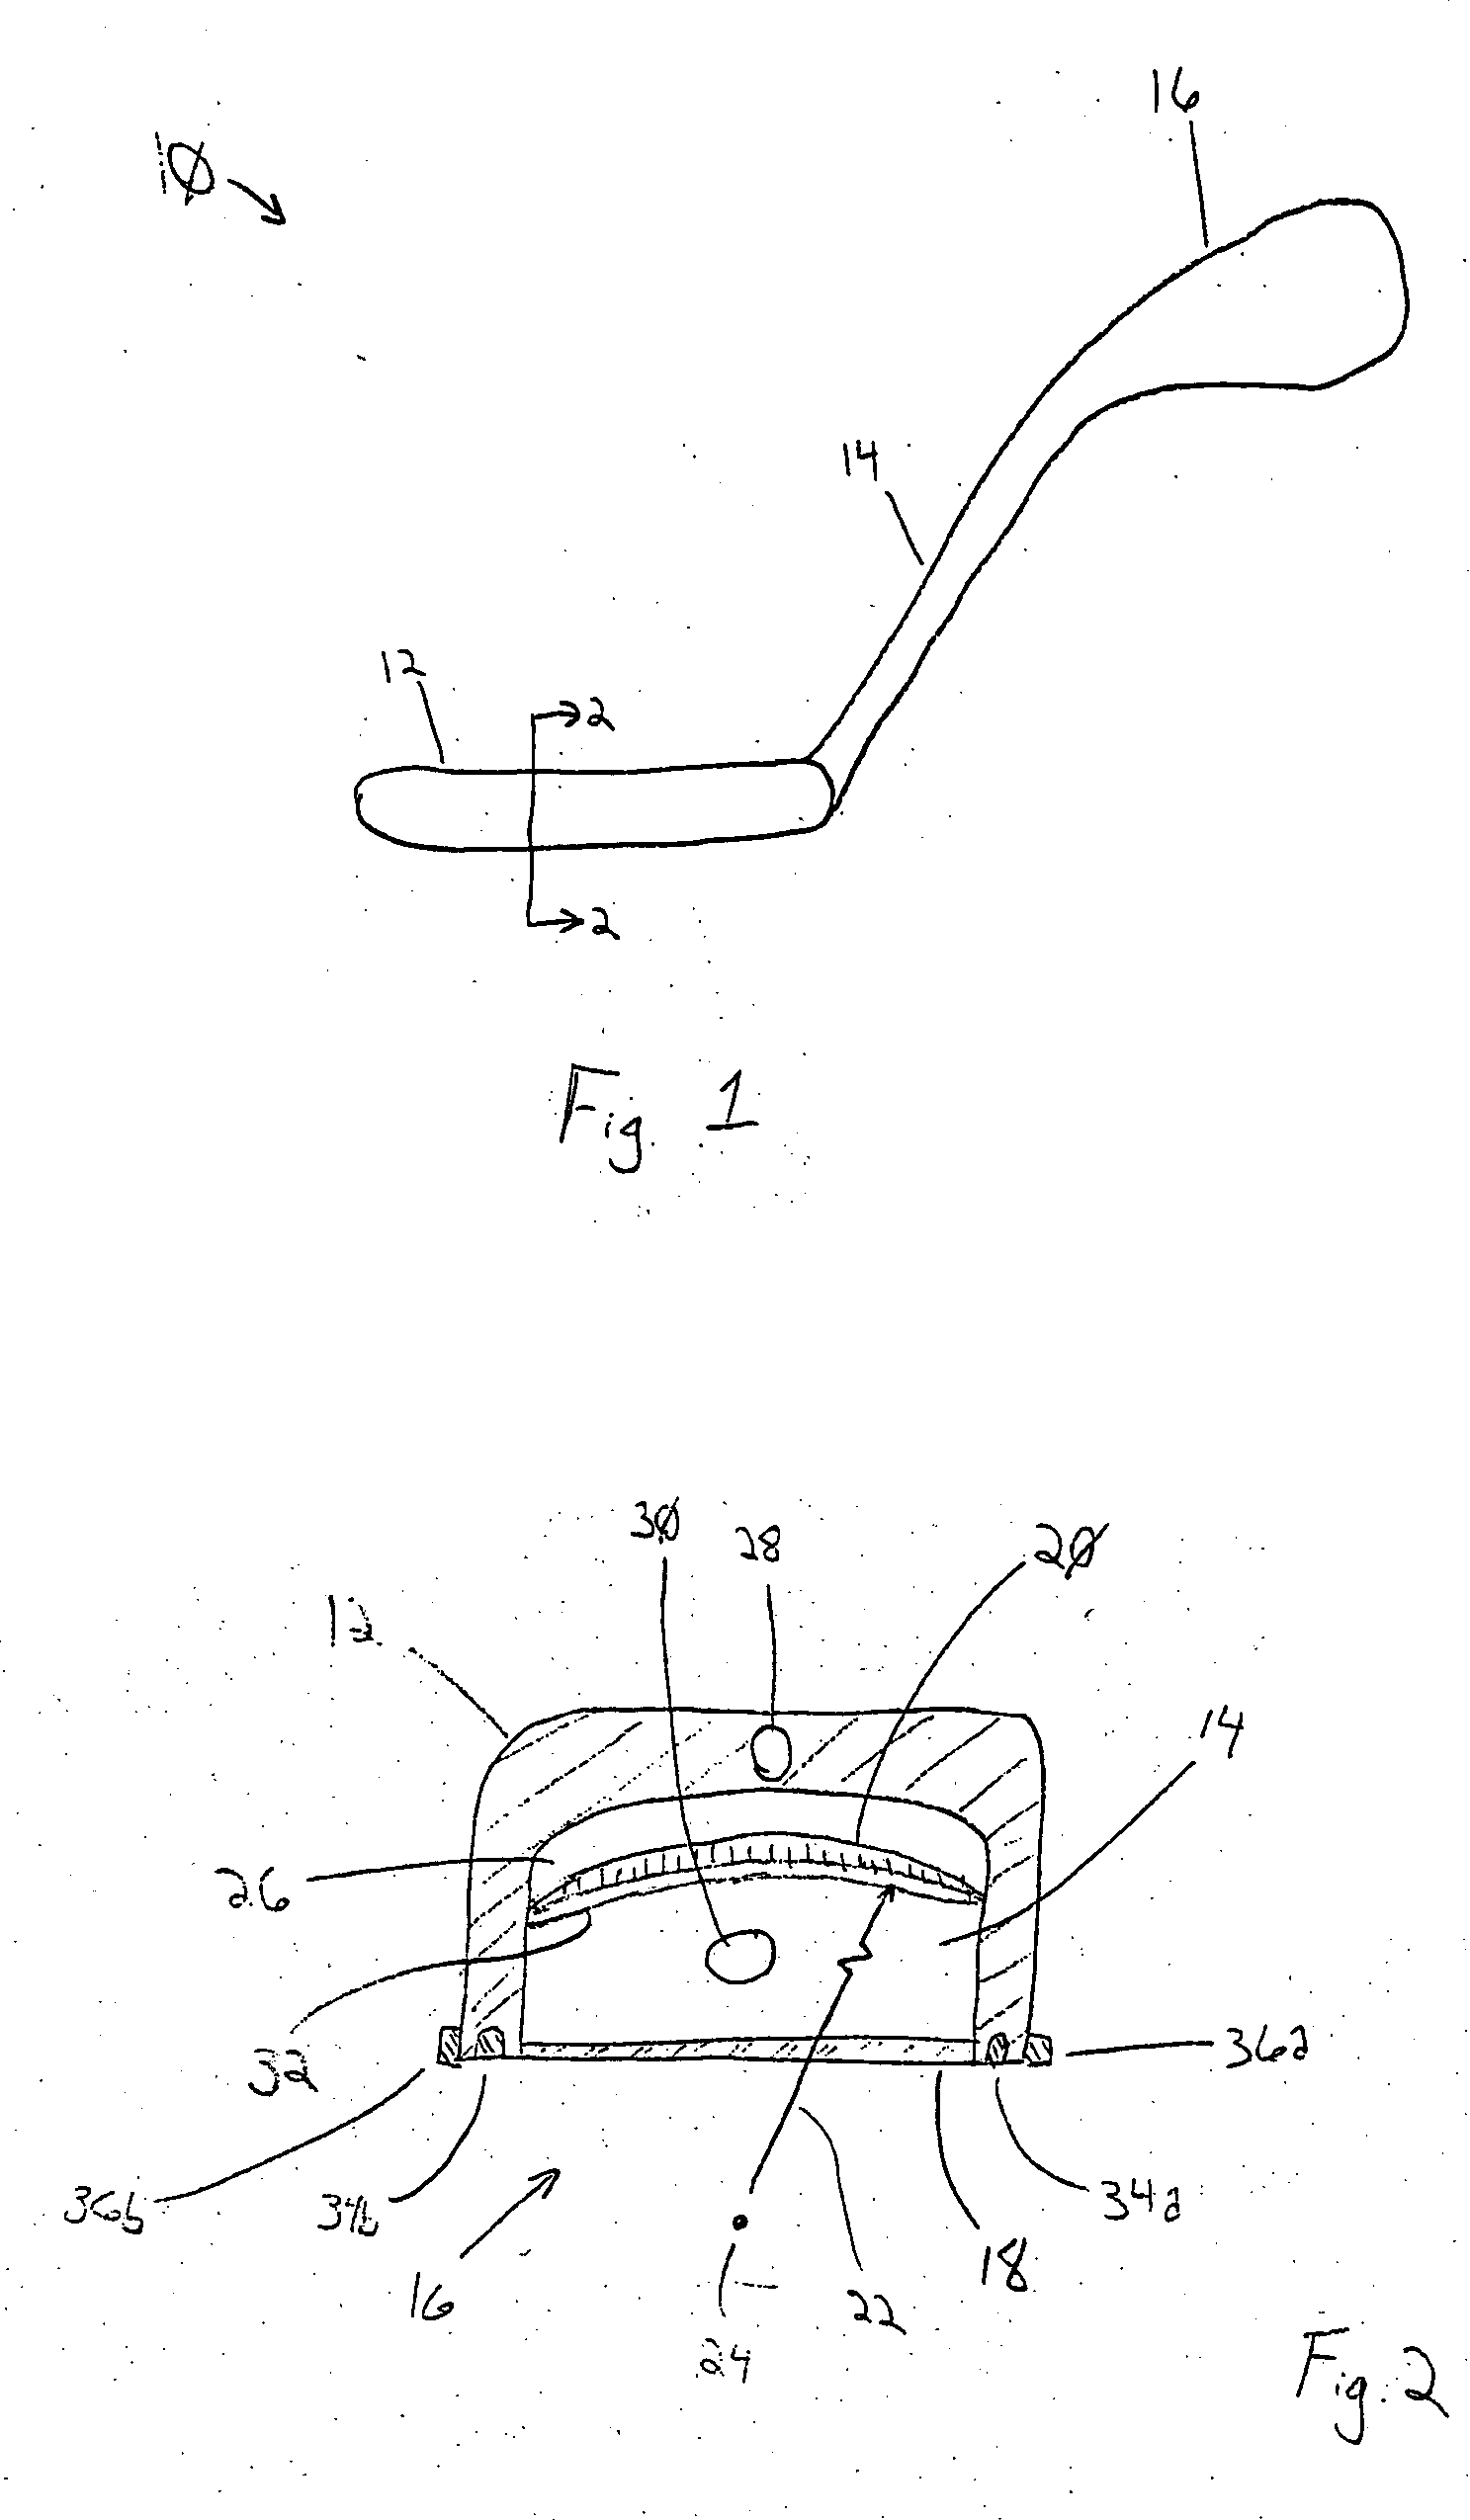 Applicator for creating linear lesions for the treatment of atrial fibrillation